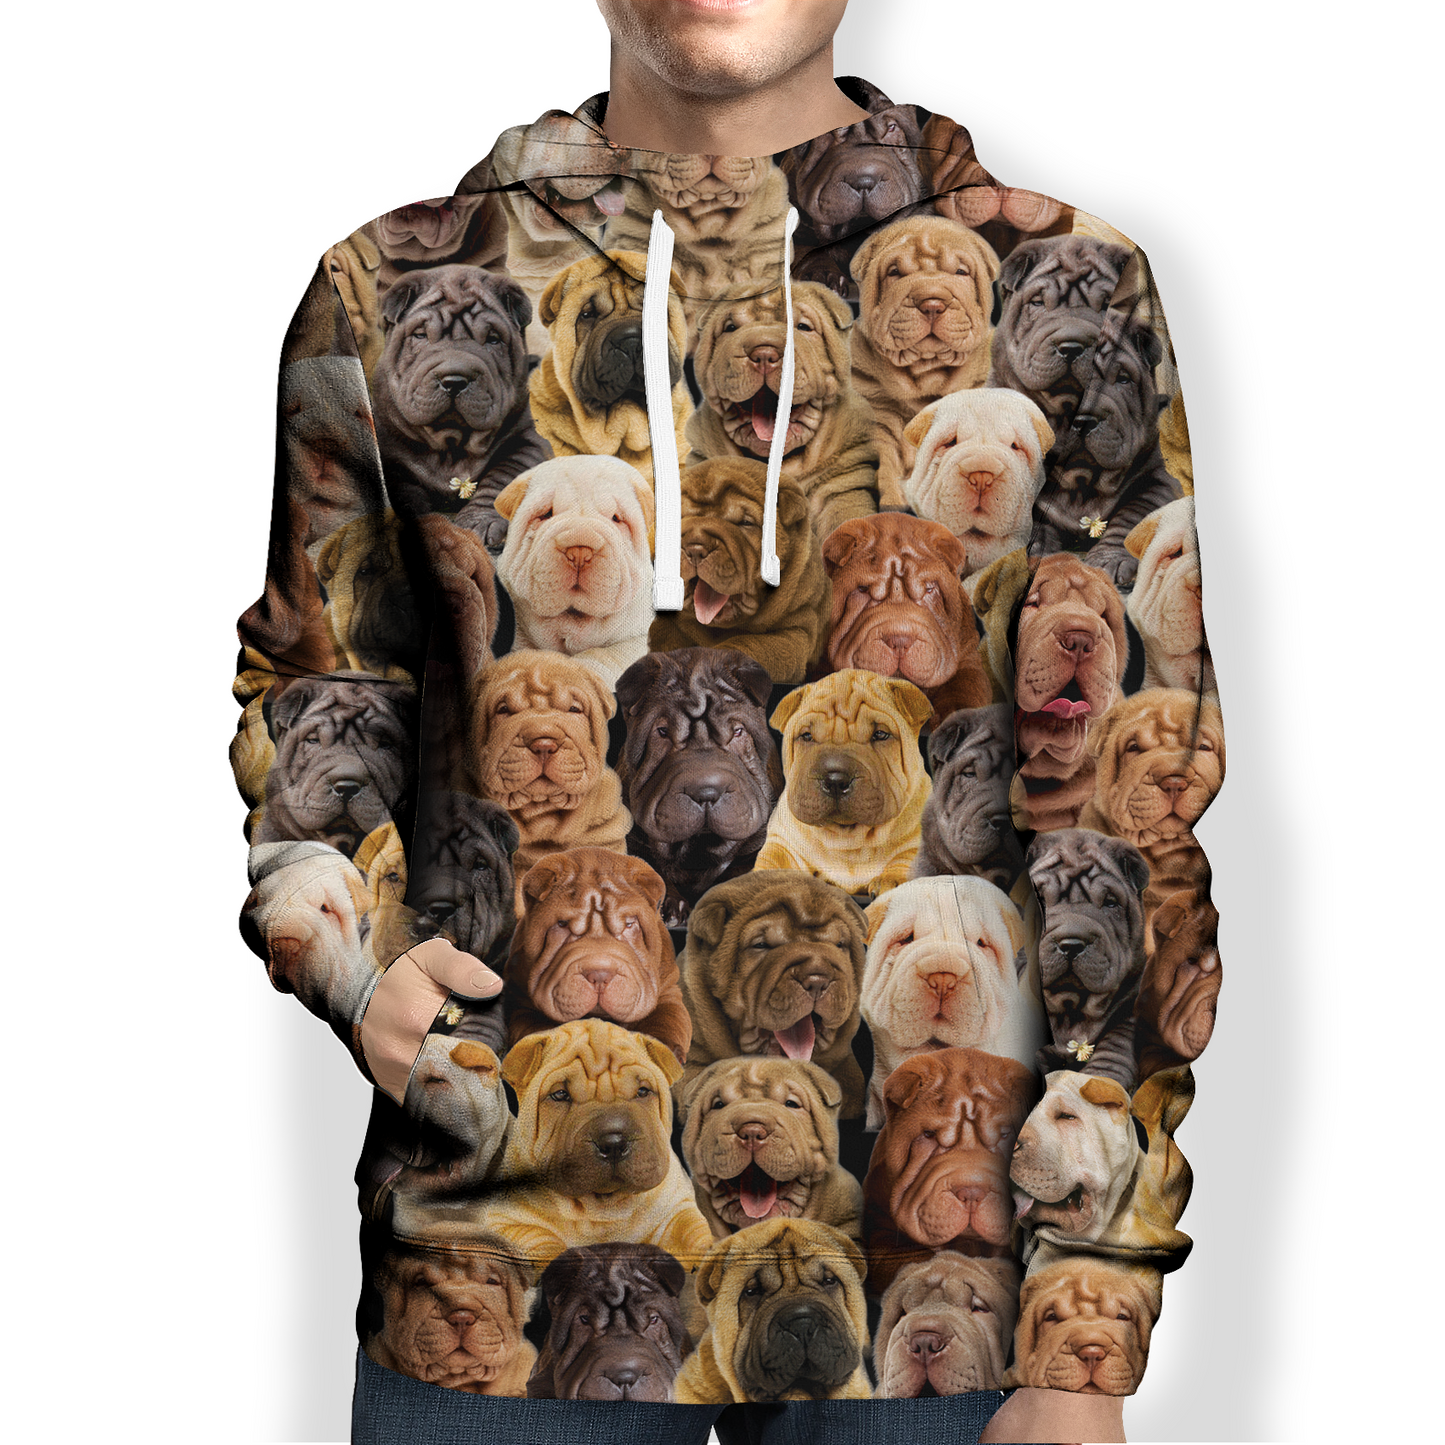 You Will Have A Bunch Of Shar Pei Dogs - Hoodie V1